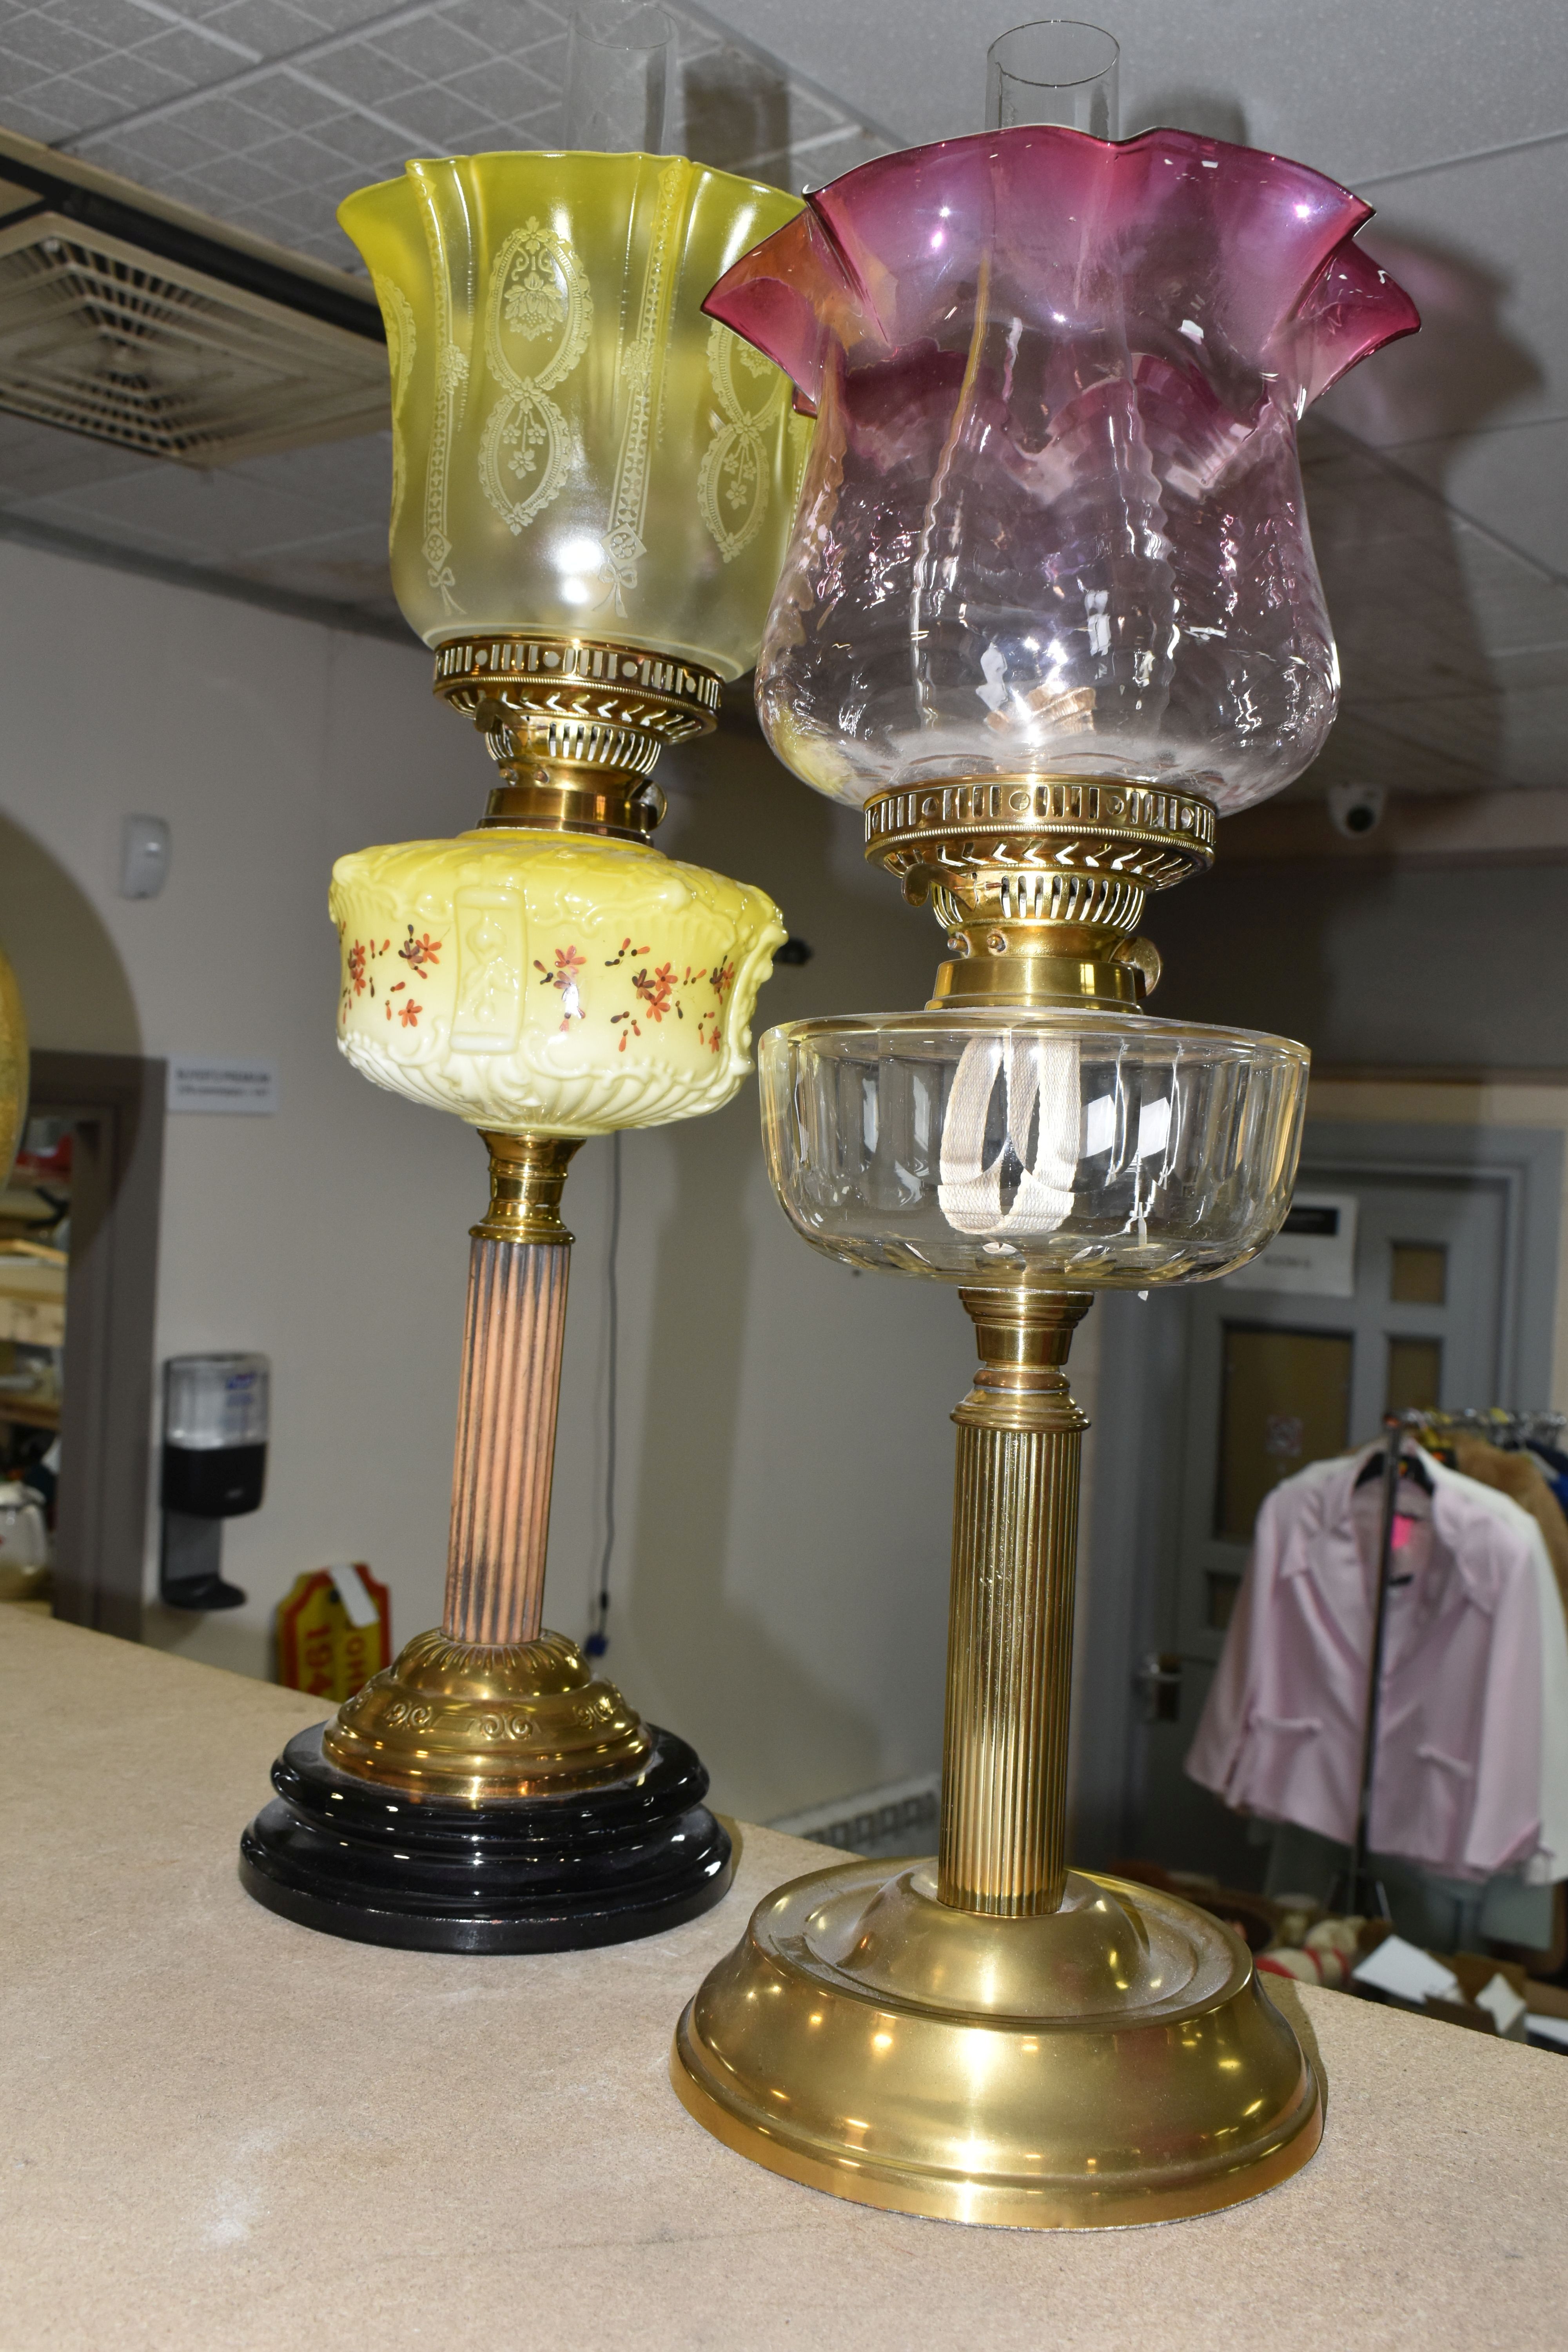 TWO VICTORIAN OIL LAMPS, one has an etched yellow glass shade, moulded yellow milk glass reservoir - Image 10 of 10